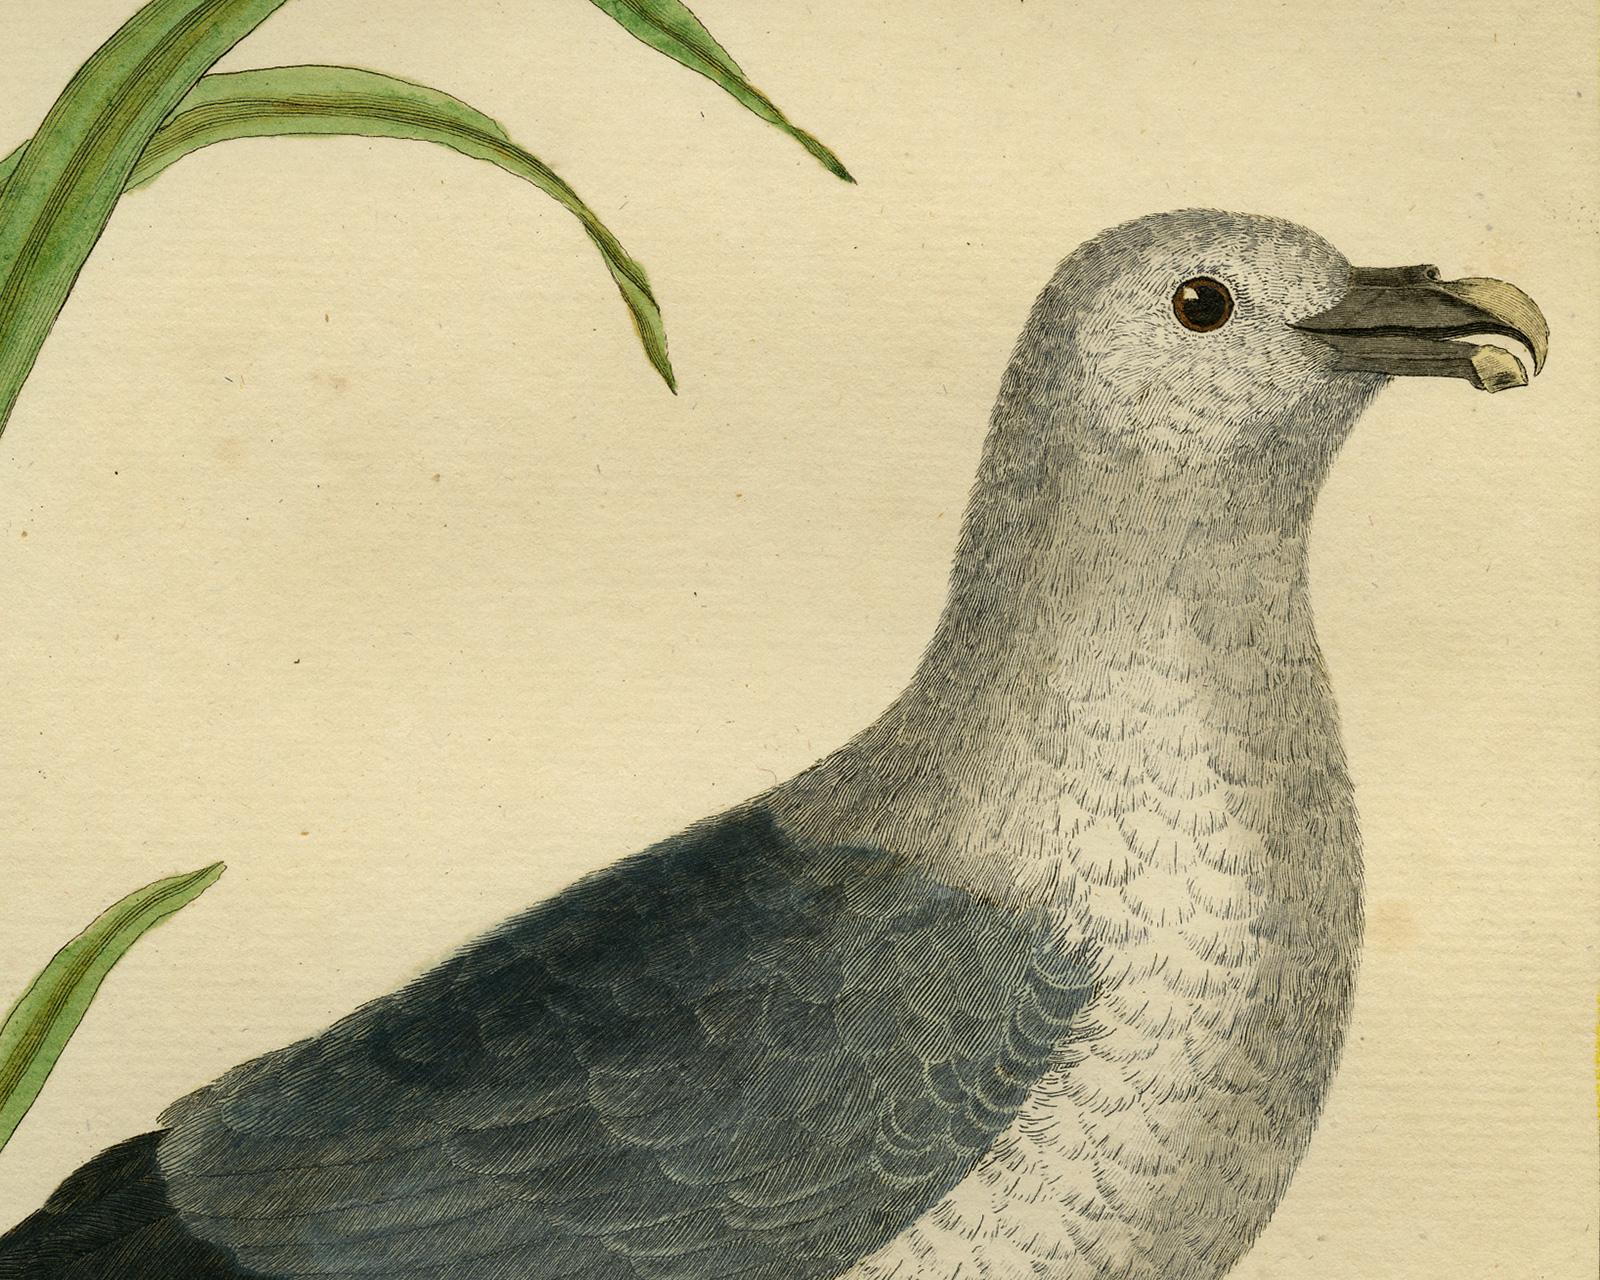 Northern Fulmar by Martinet - Handcoloured engraving - 18th century - Old Masters Print by Francois Nicolas Martinet